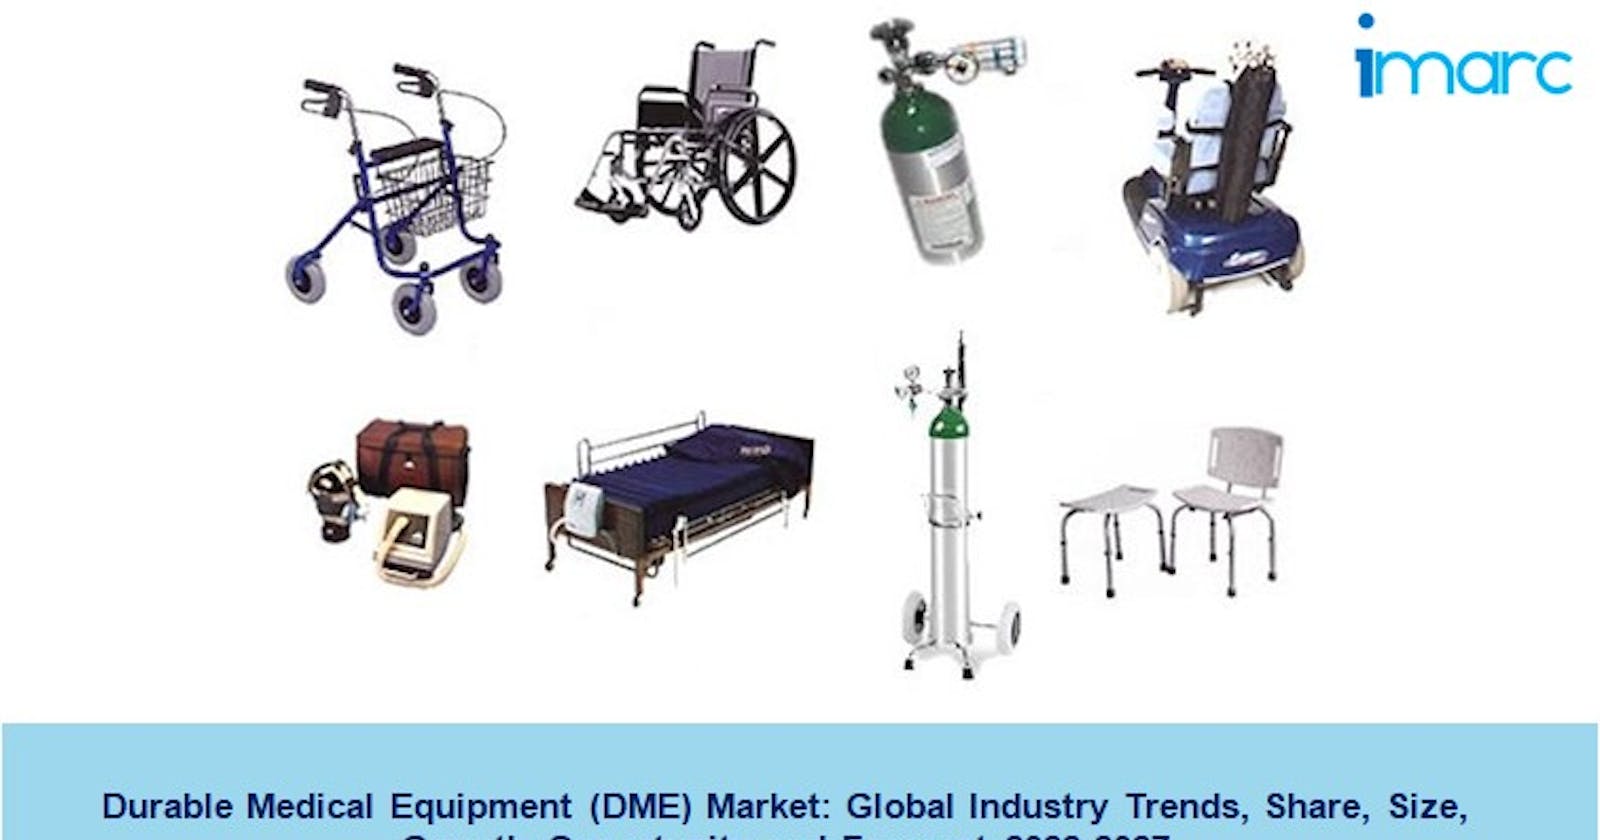 Durable Medical Equipment Market Trends, Demand, Share and Analysis 2022-2027